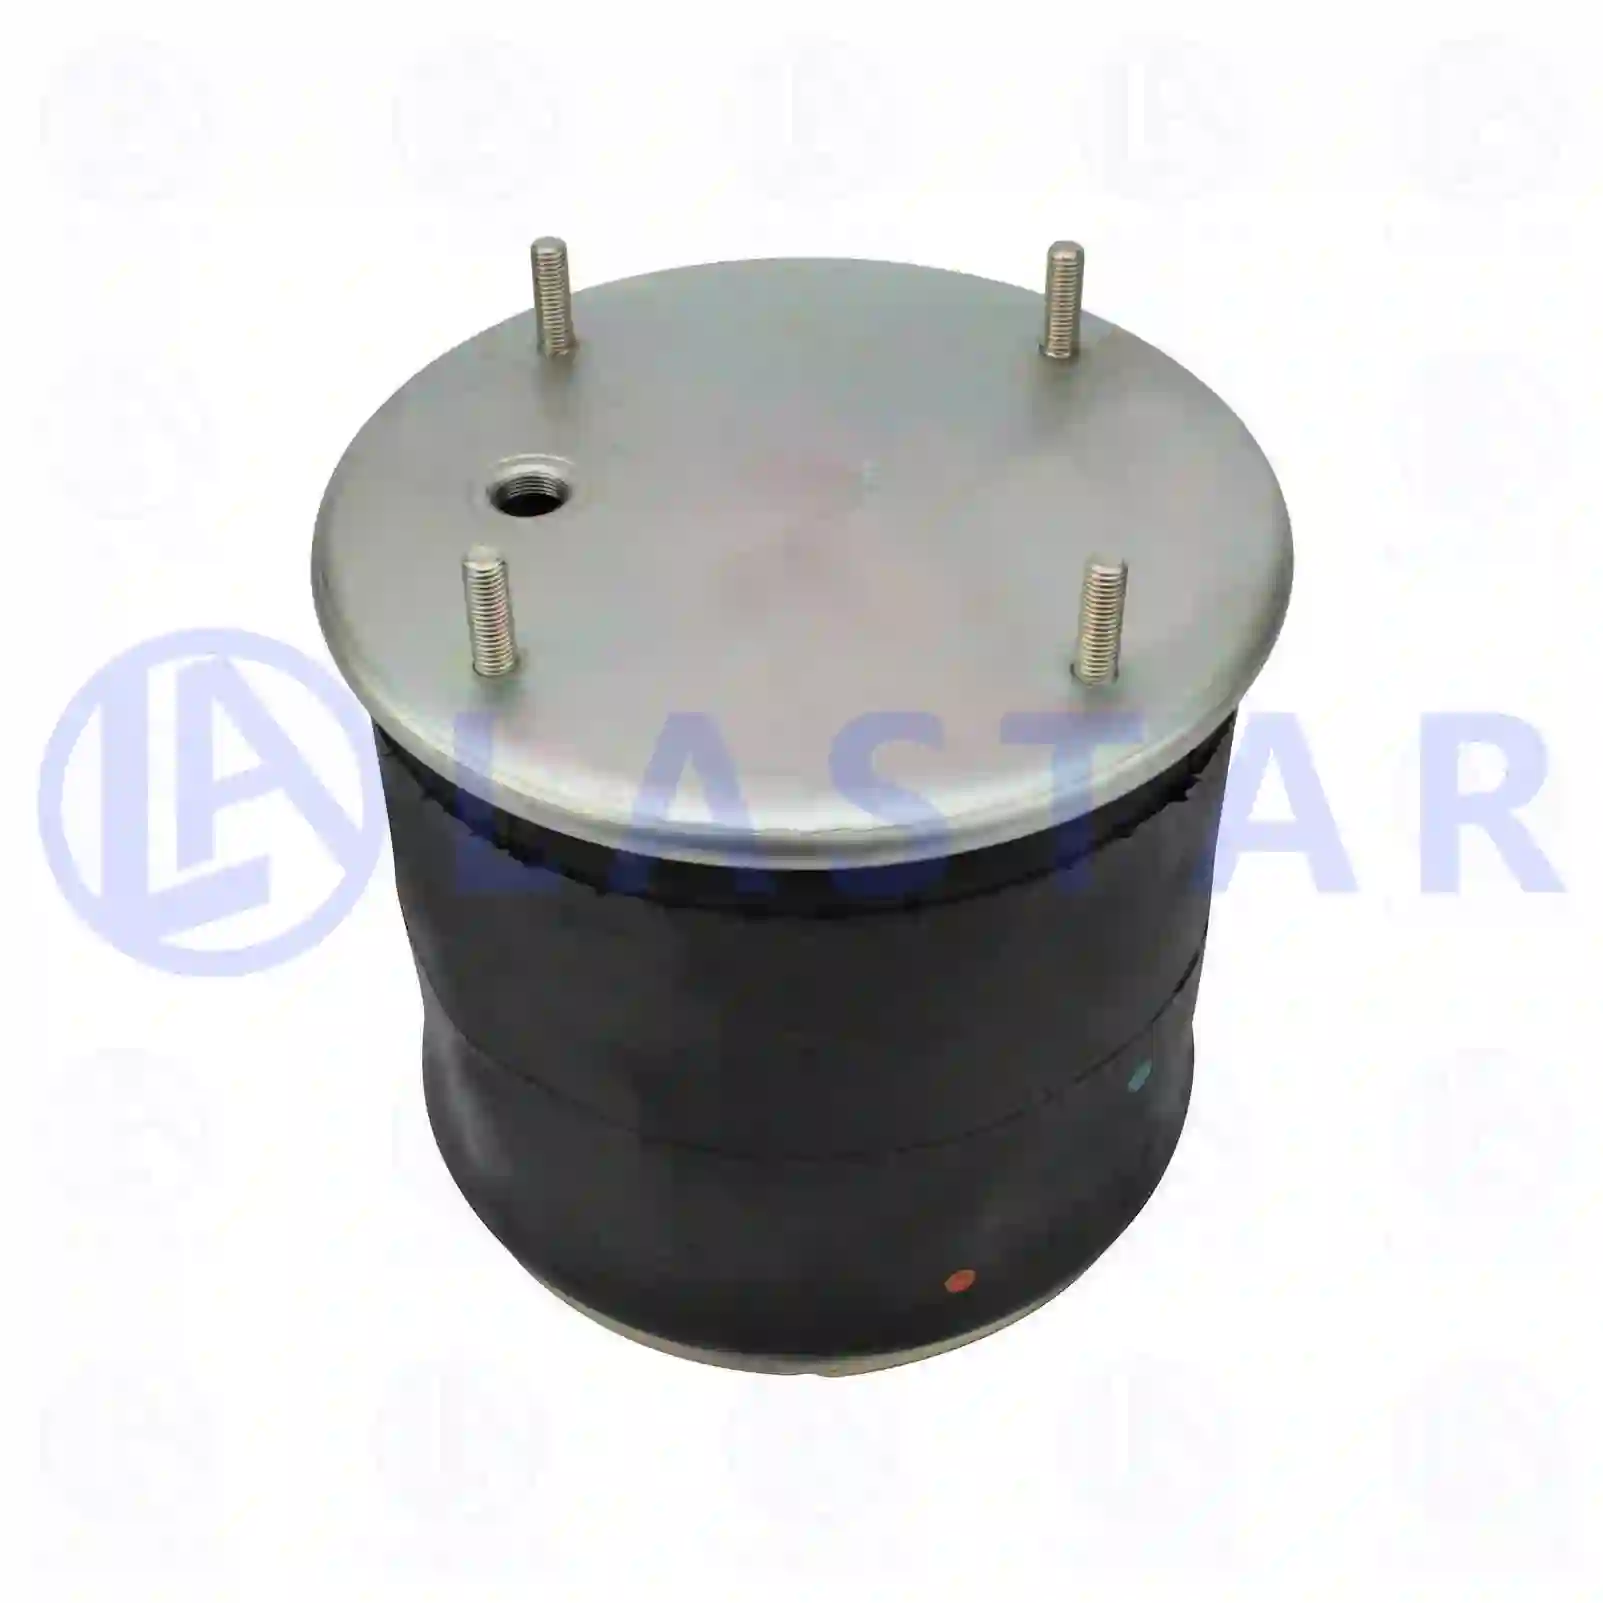 Air spring, with steel piston, 77728503, 1322719, 1384273, 1518203, 506243, 785168, 5000452939, 5021170405, 12108082, 21208082, 21215632, 2228000200, 2228210200, 2228220200, 2228240200, 2228260200, 2229000200, 2229210200, 2229260200, 2228000200, 6504646G, 1080707 ||  77728503 Lastar Spare Part | Truck Spare Parts, Auotomotive Spare Parts Air spring, with steel piston, 77728503, 1322719, 1384273, 1518203, 506243, 785168, 5000452939, 5021170405, 12108082, 21208082, 21215632, 2228000200, 2228210200, 2228220200, 2228240200, 2228260200, 2229000200, 2229210200, 2229260200, 2228000200, 6504646G, 1080707 ||  77728503 Lastar Spare Part | Truck Spare Parts, Auotomotive Spare Parts